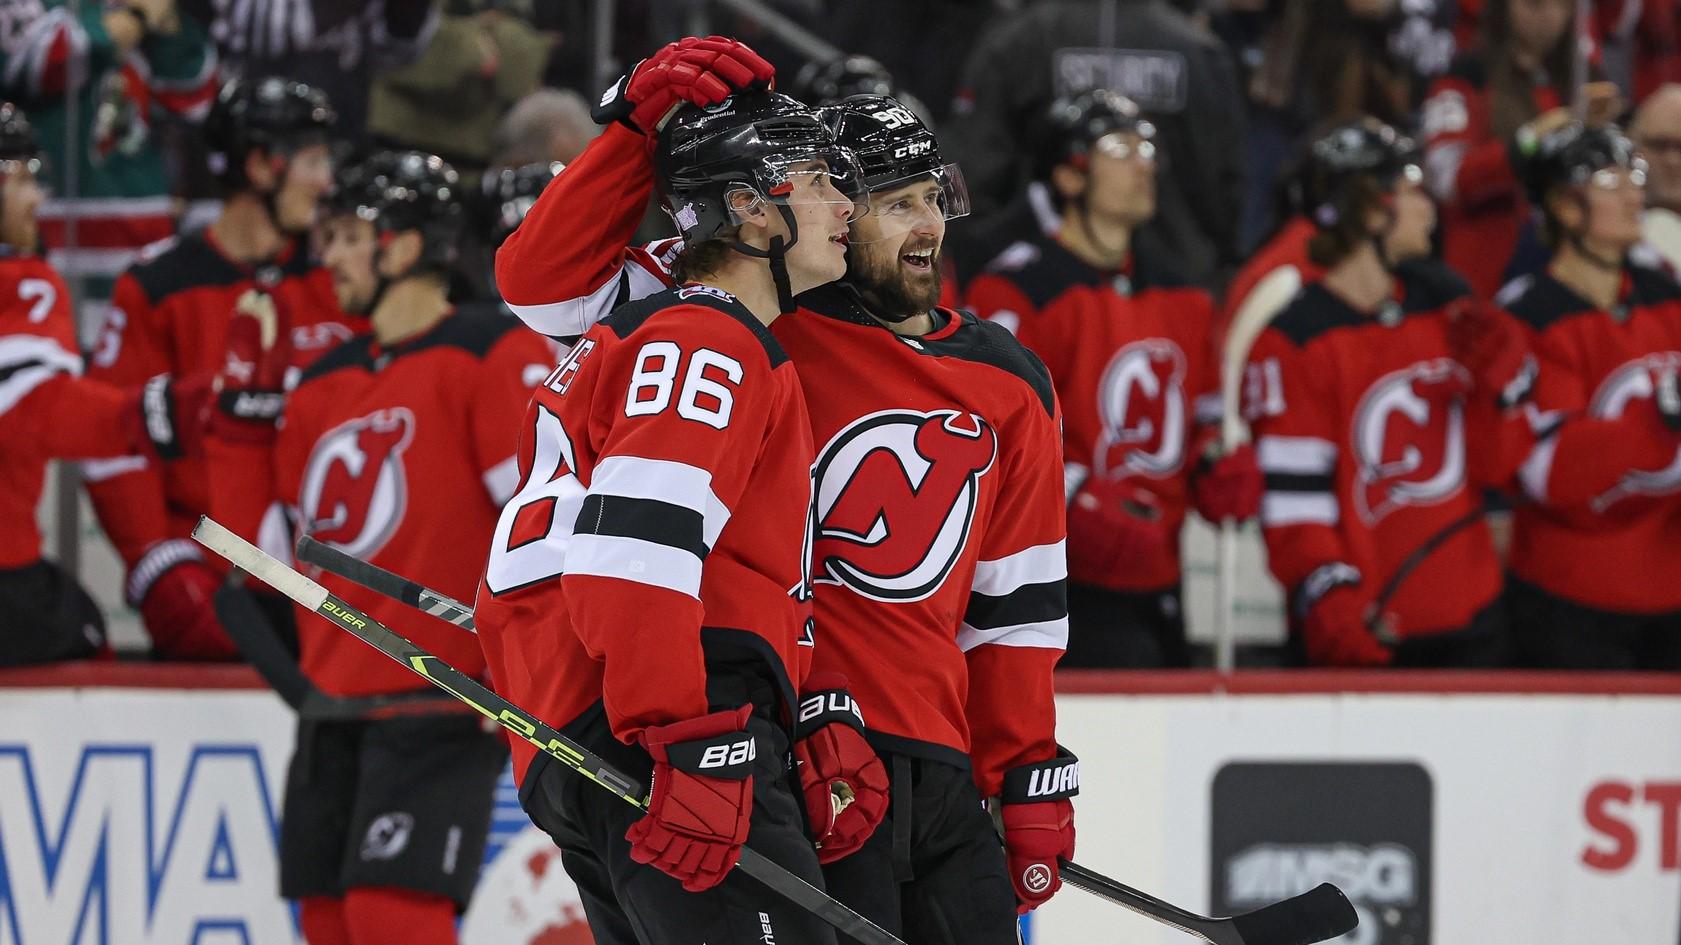 Nov 12, 2022; Newark, New Jersey, USA; New Jersey Devils center Jack Hughes (86) and left wing Tomas Tatar (90) look up at the main scoreboard after a goal against the Arizona Coyotes during the first period at Prudential Center. / Vincent Carchietta-USA TODAY Sports